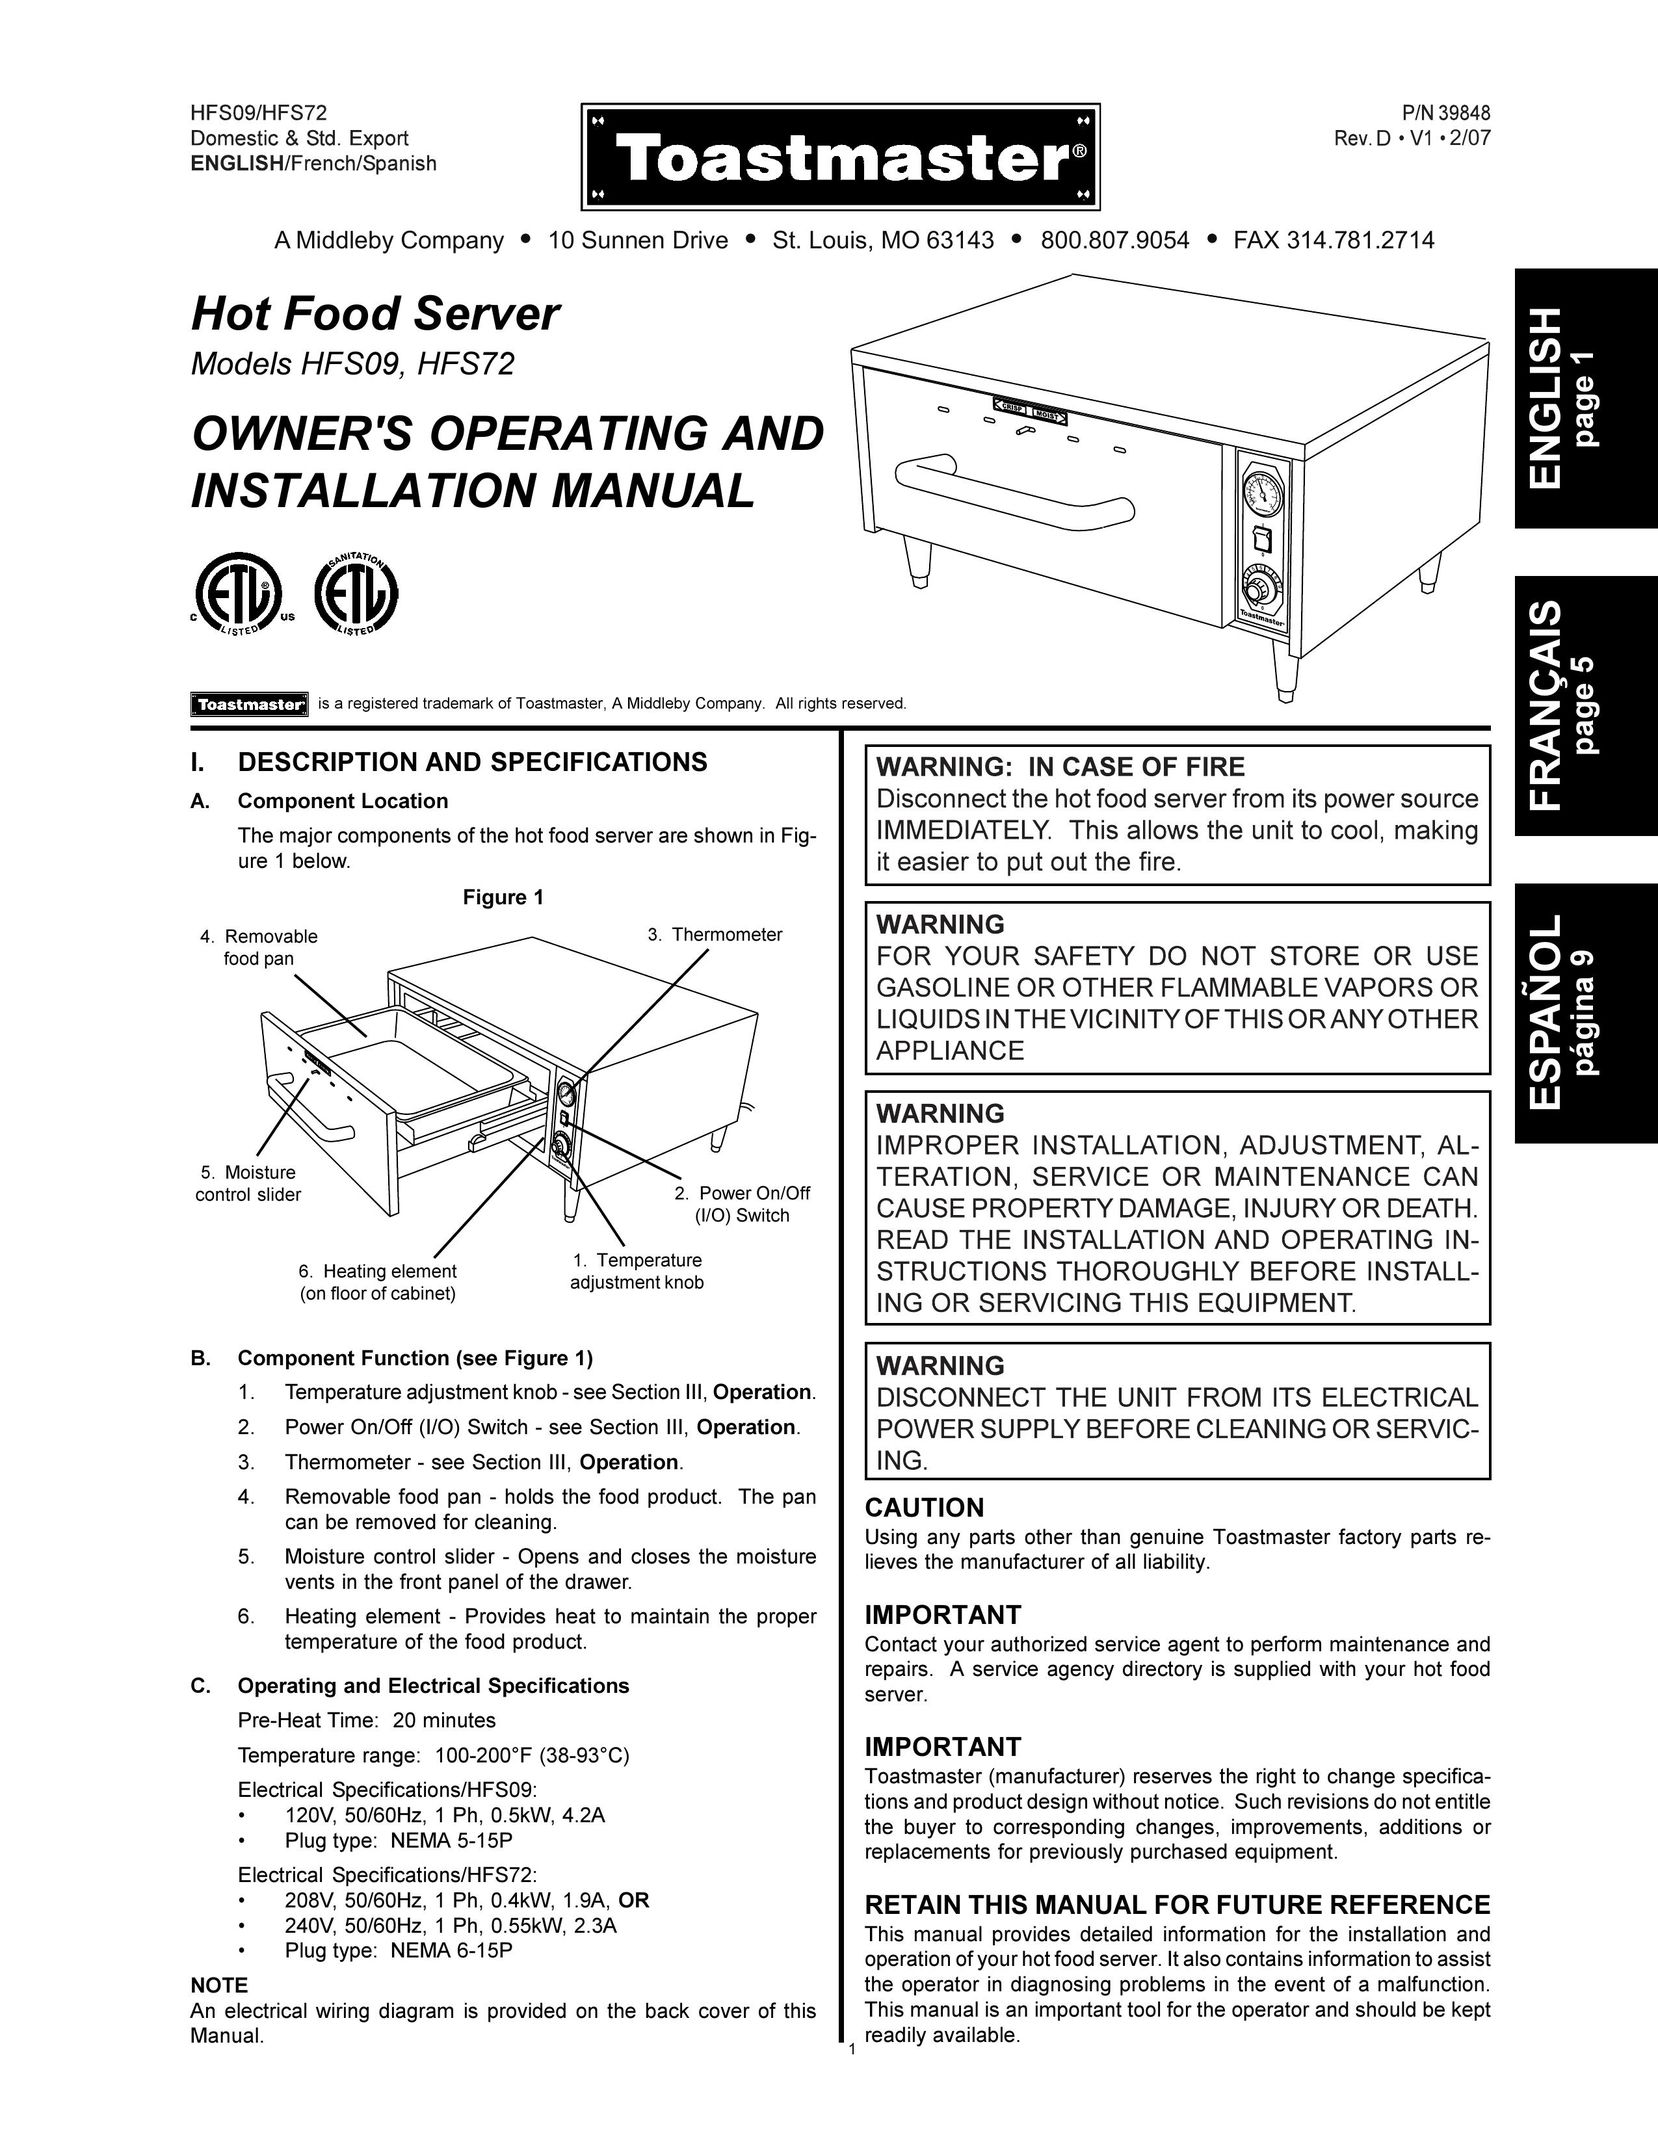 Toastmaster HFS72 Convection Oven User Manual